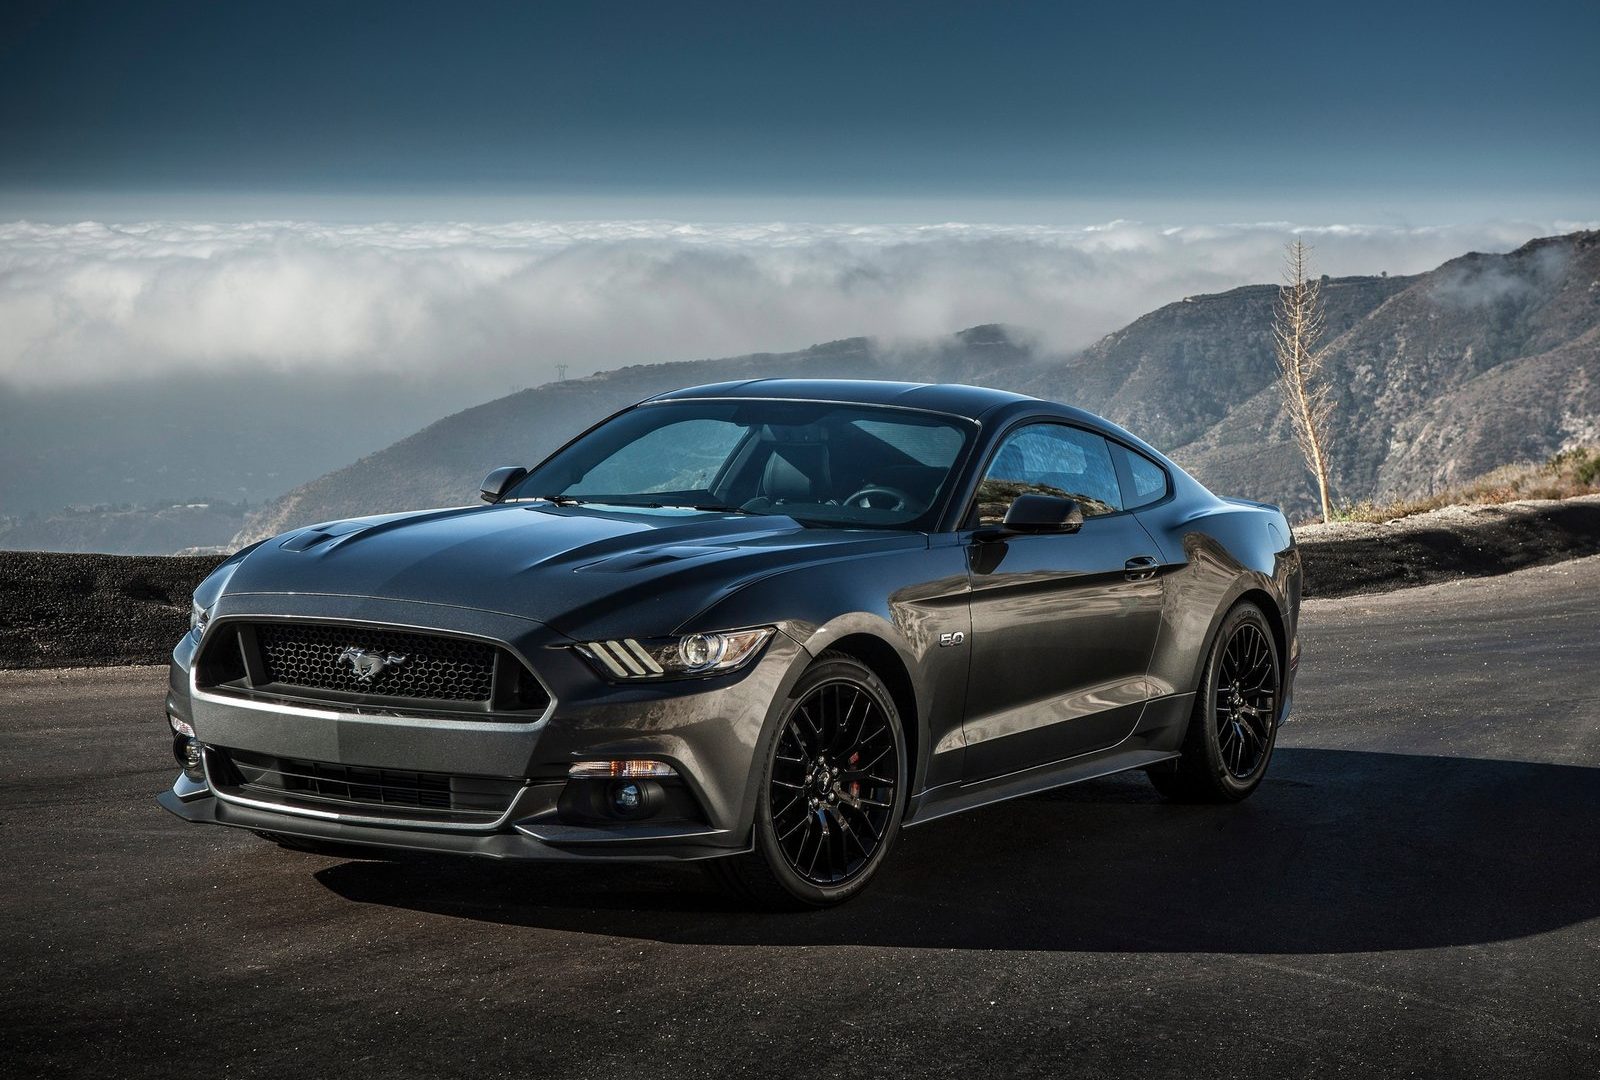 Sixth Gen Ford Mustang